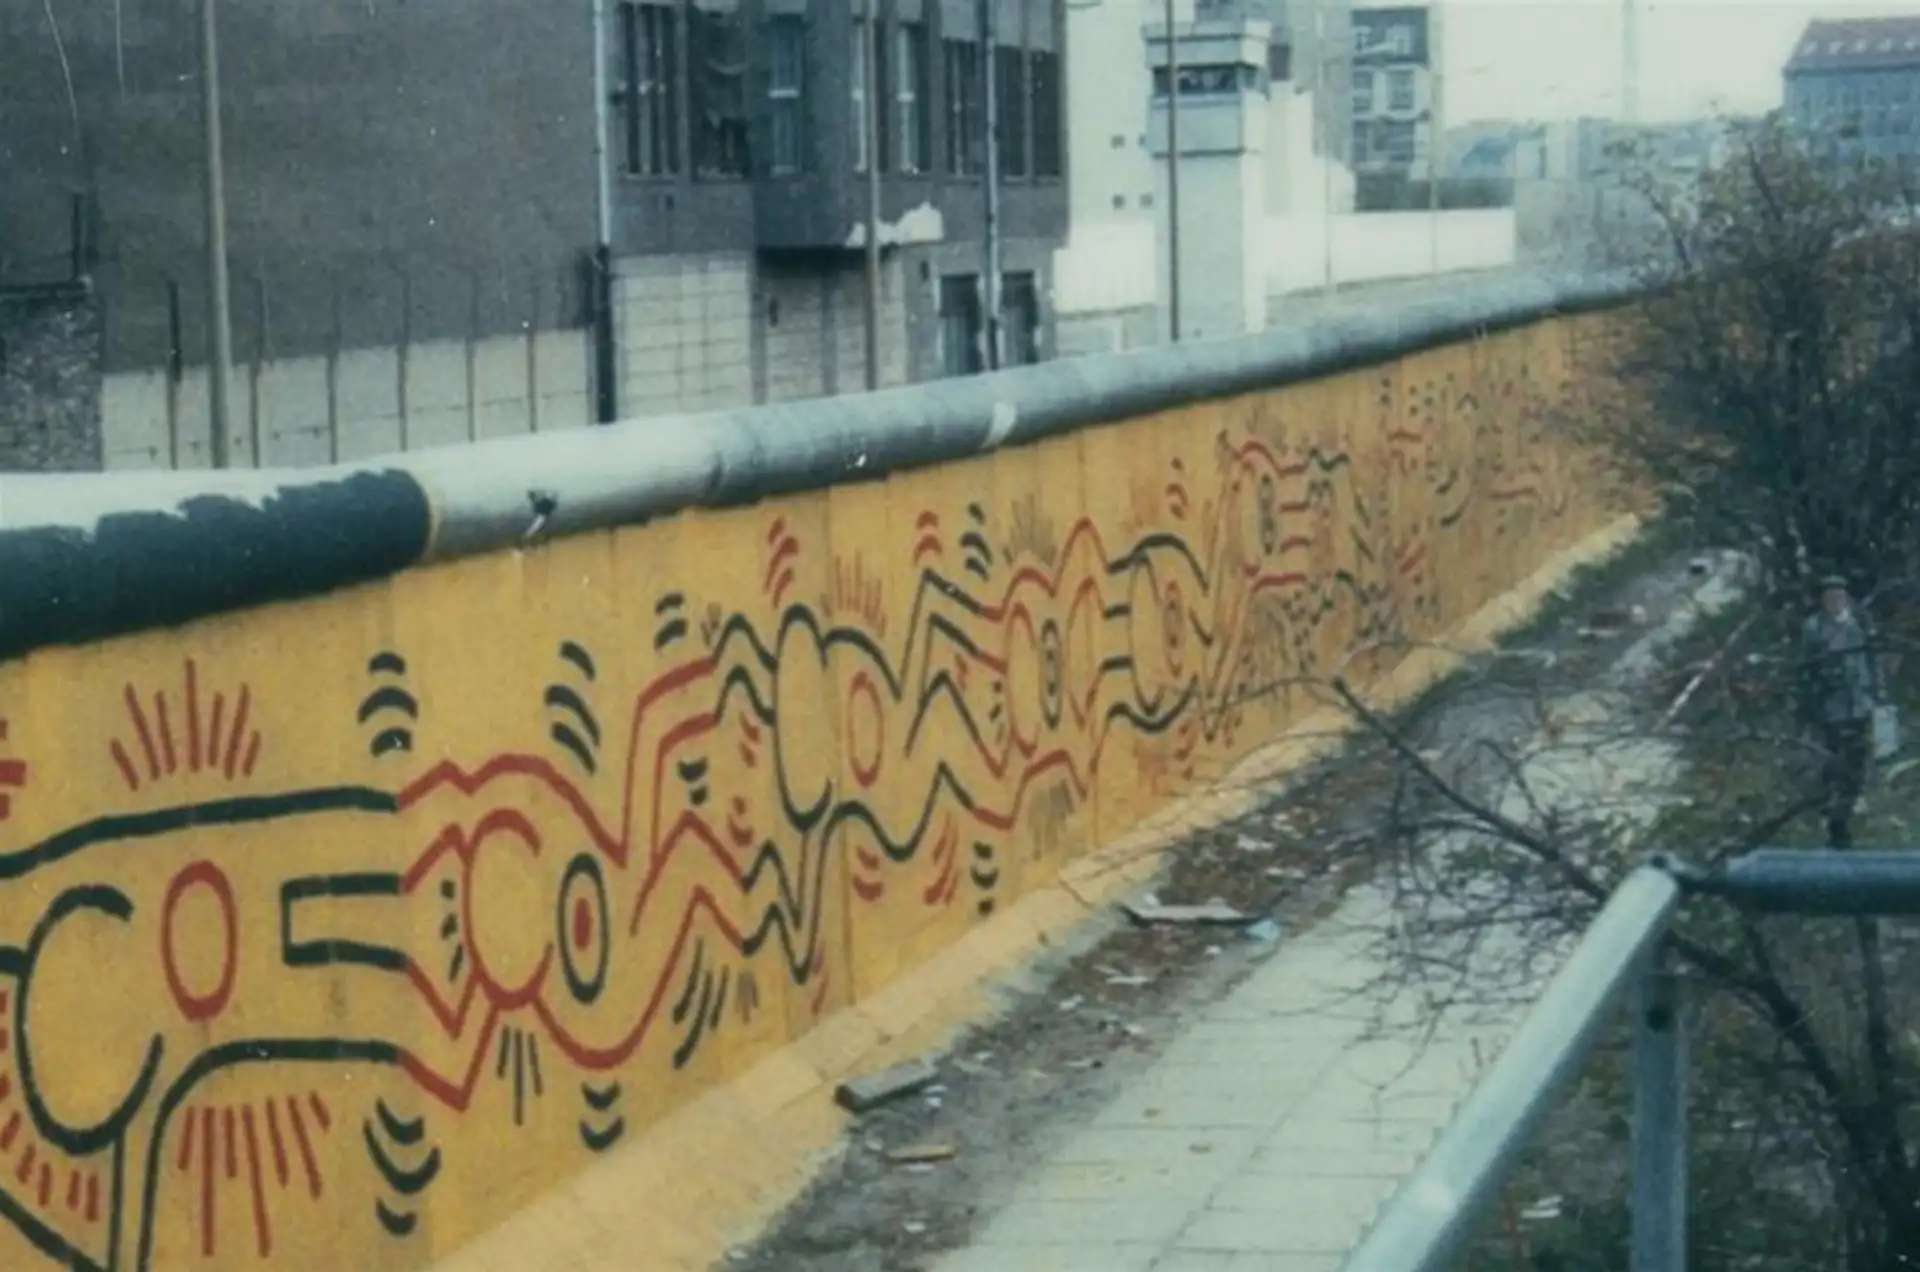 Keith Haring's mural on the Berlin Wall, depicting a chain of conjoined figures in red and black against a yellow background.